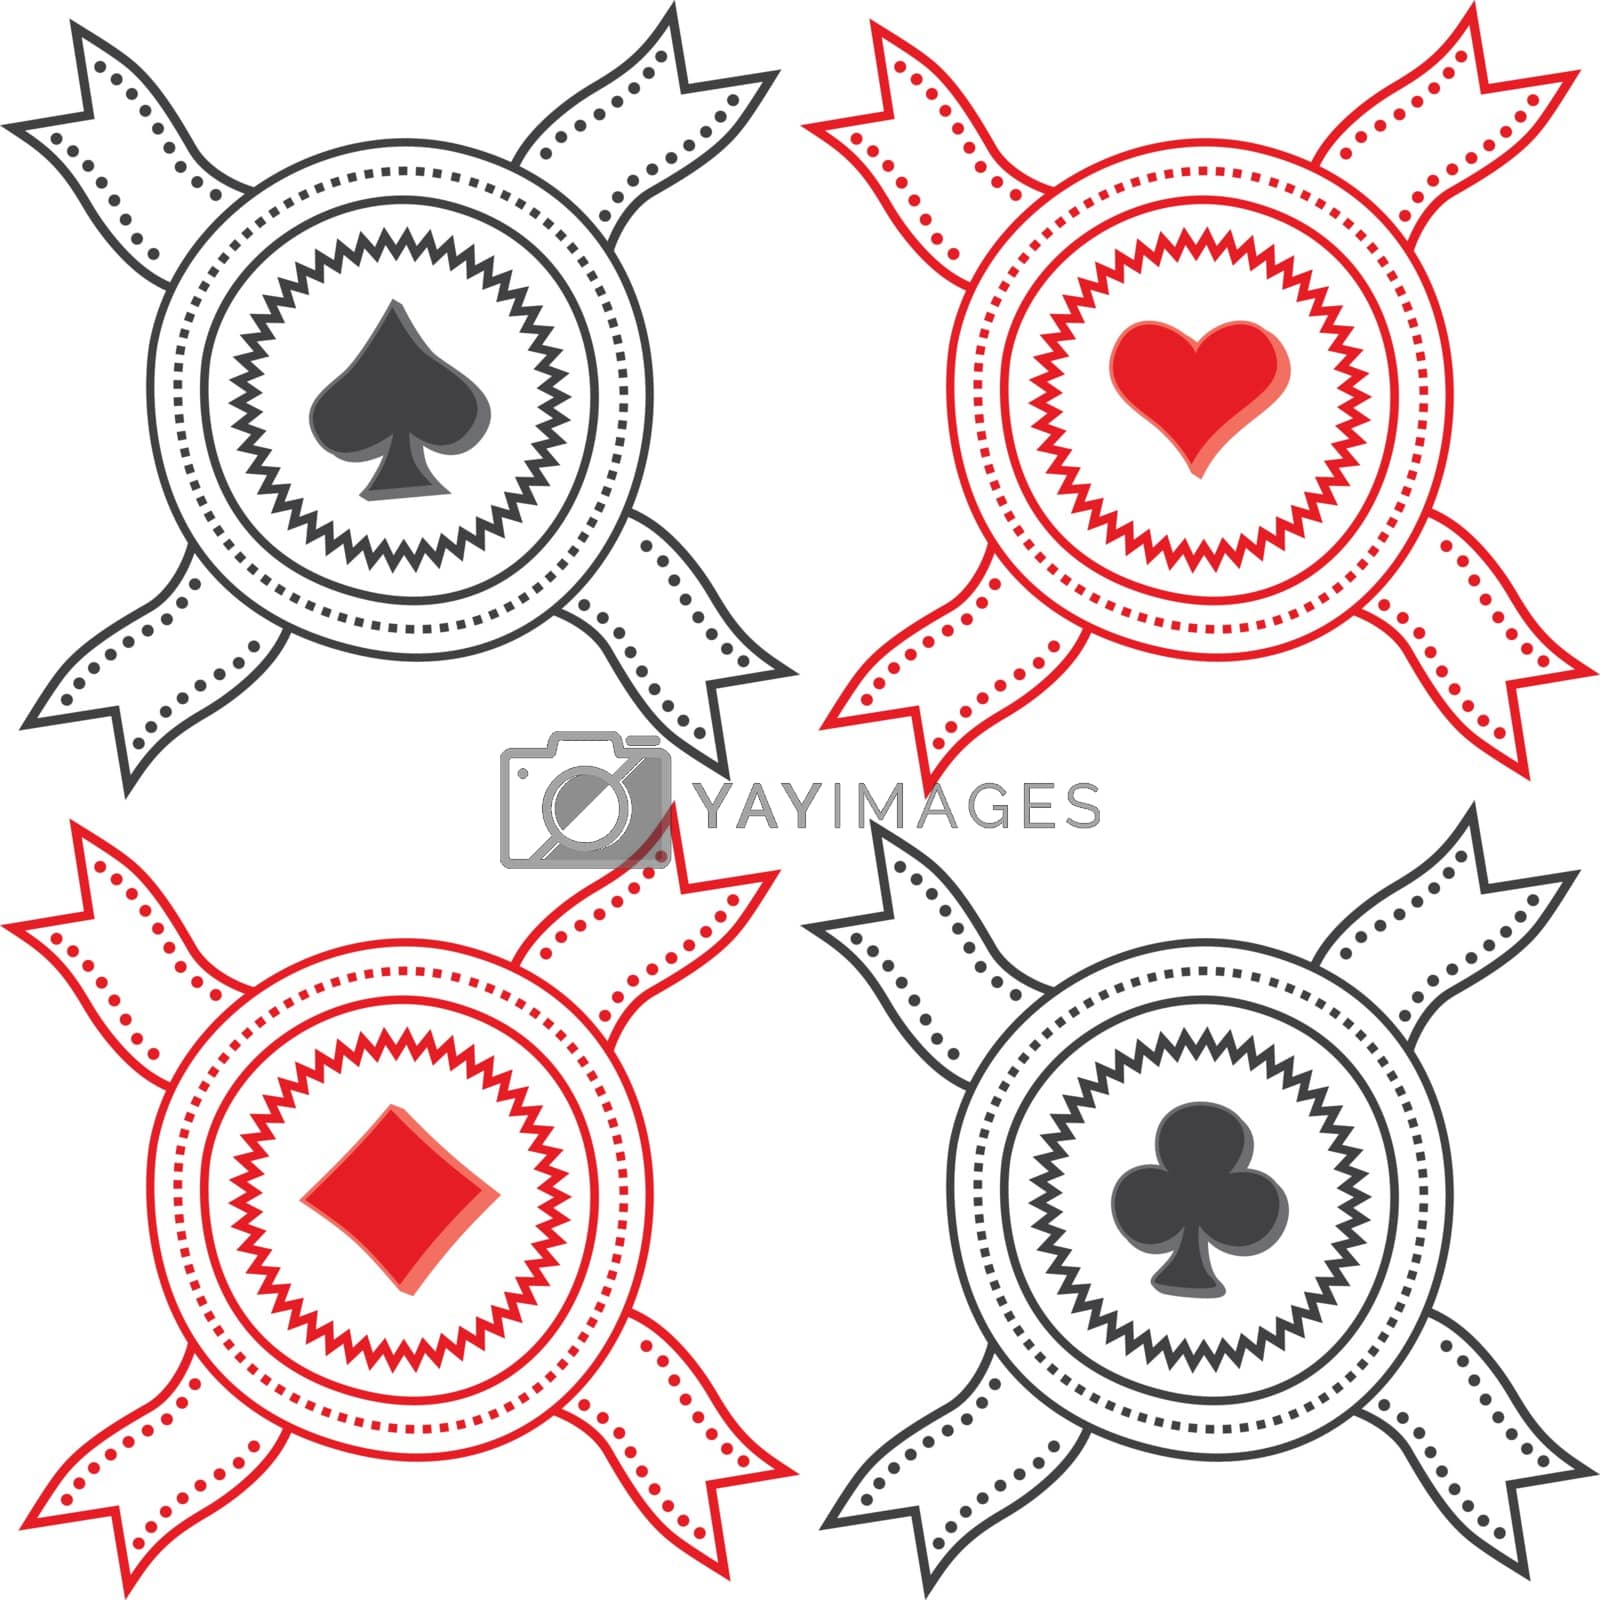 Royalty free image of poker theme by vector1st